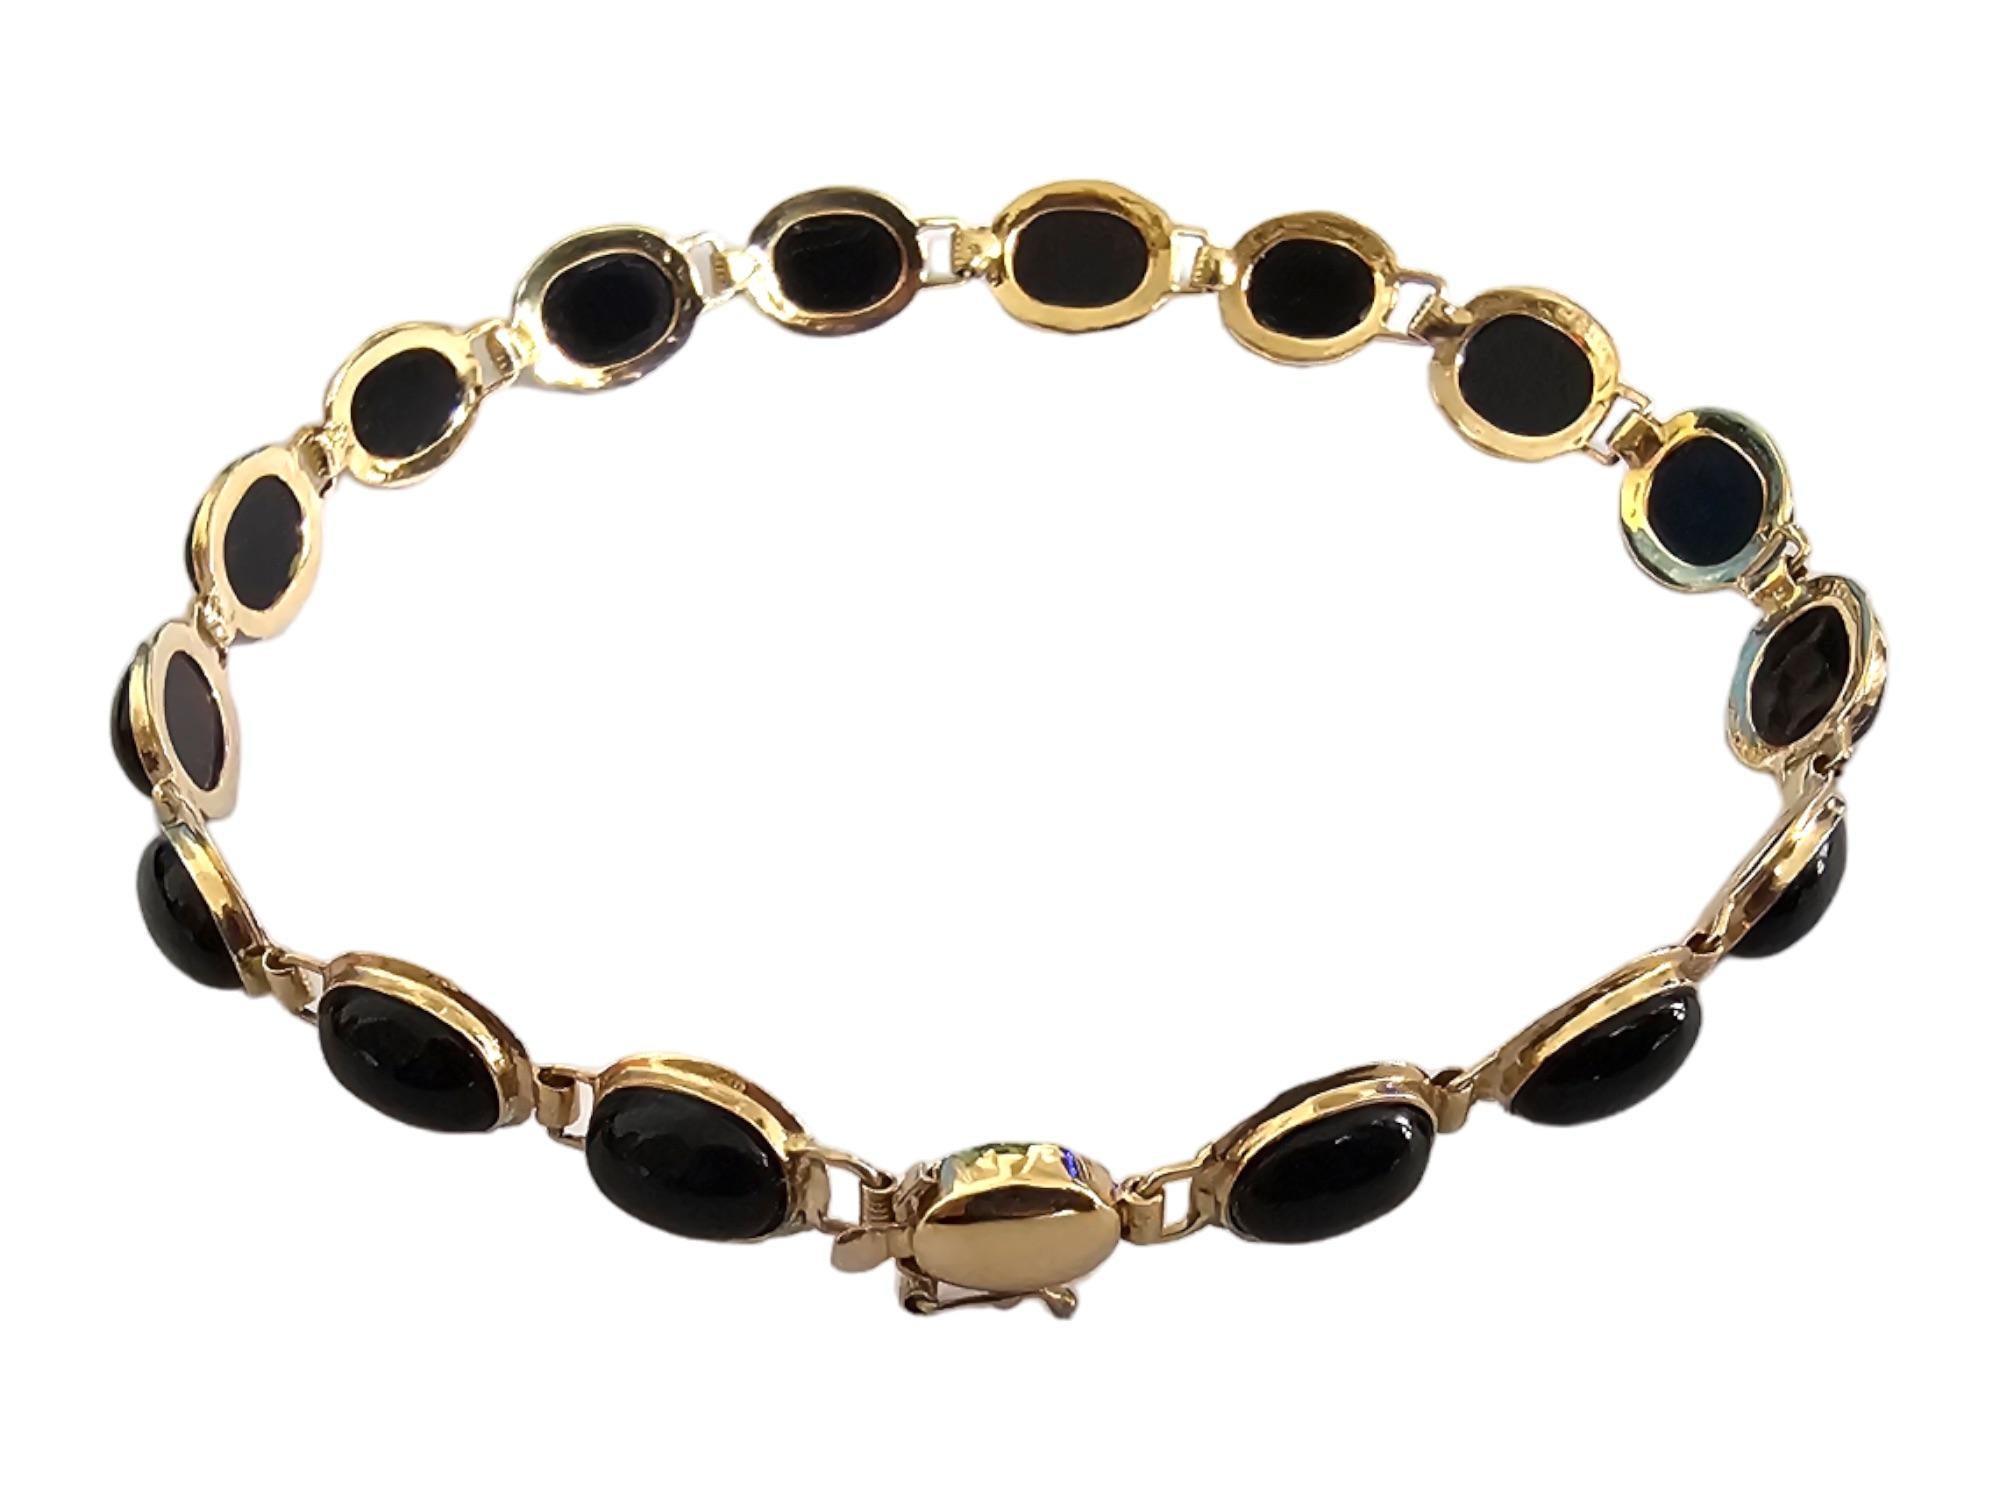 Tibetan Black Onyx Beaded Bracelet (with 14K Solid Yellow Gold) For Sale 1